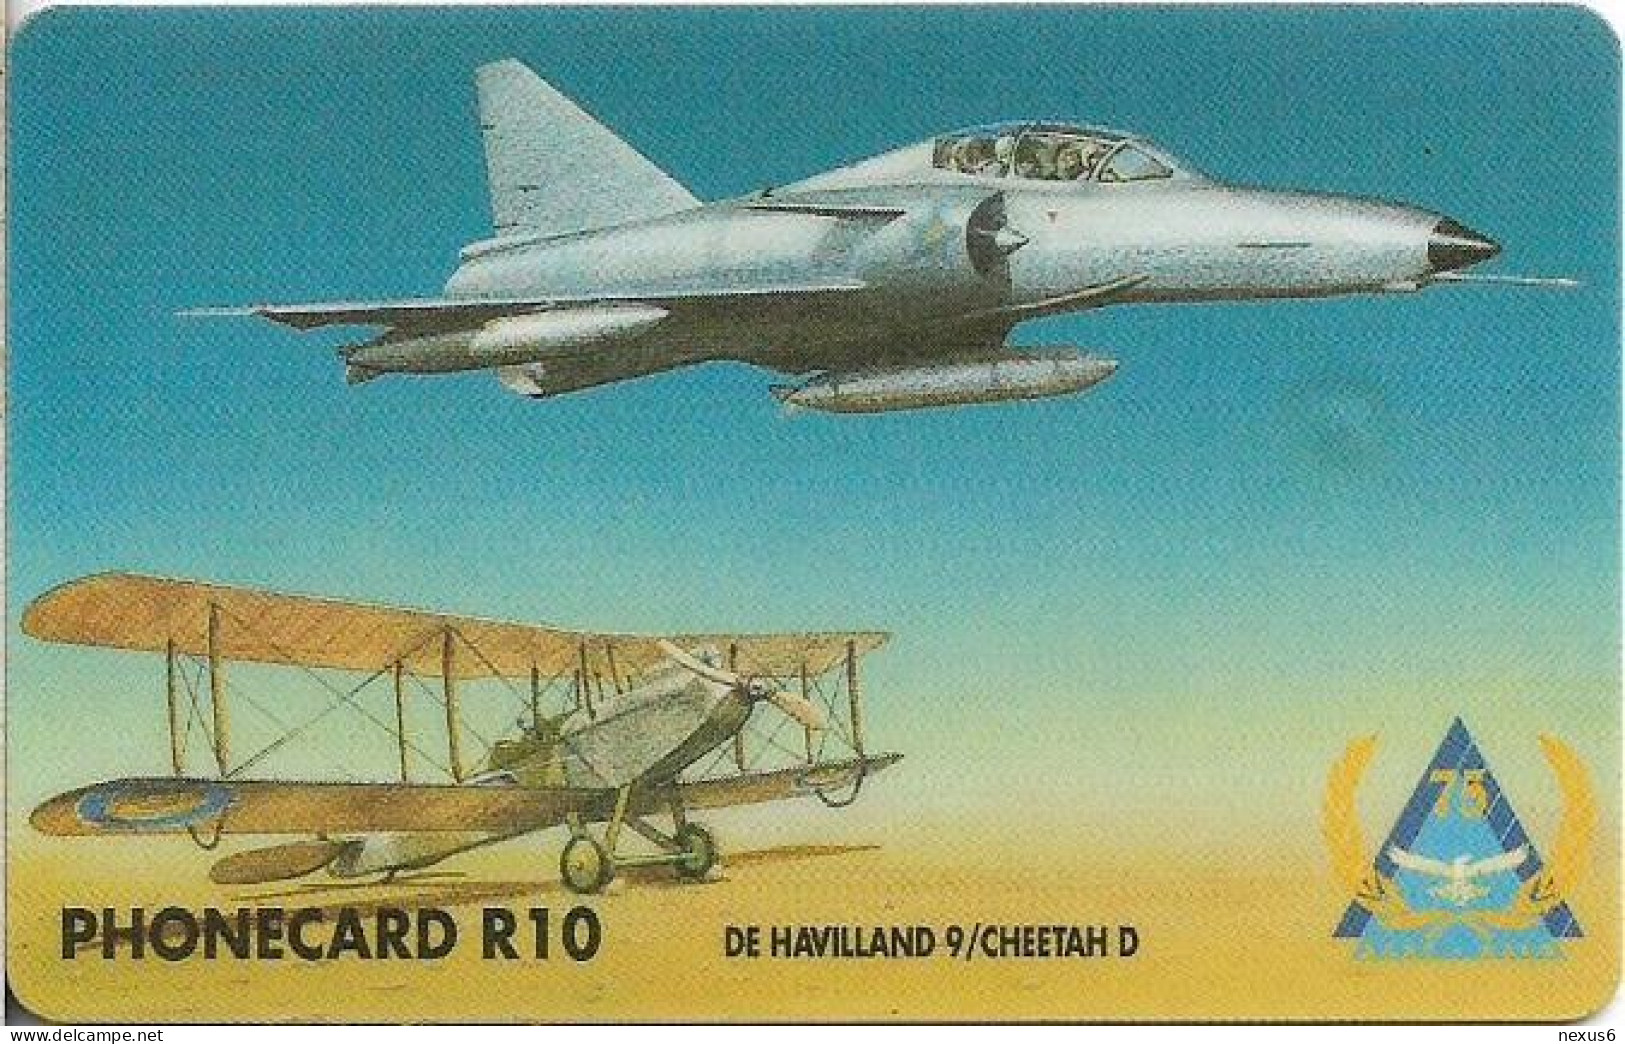 S. Africa - Telkom - De Havilland 9, Air Forces (Cn. Dashed Ø, Thin), Chip Siemens S30, 1995, 10R, Used - South Africa